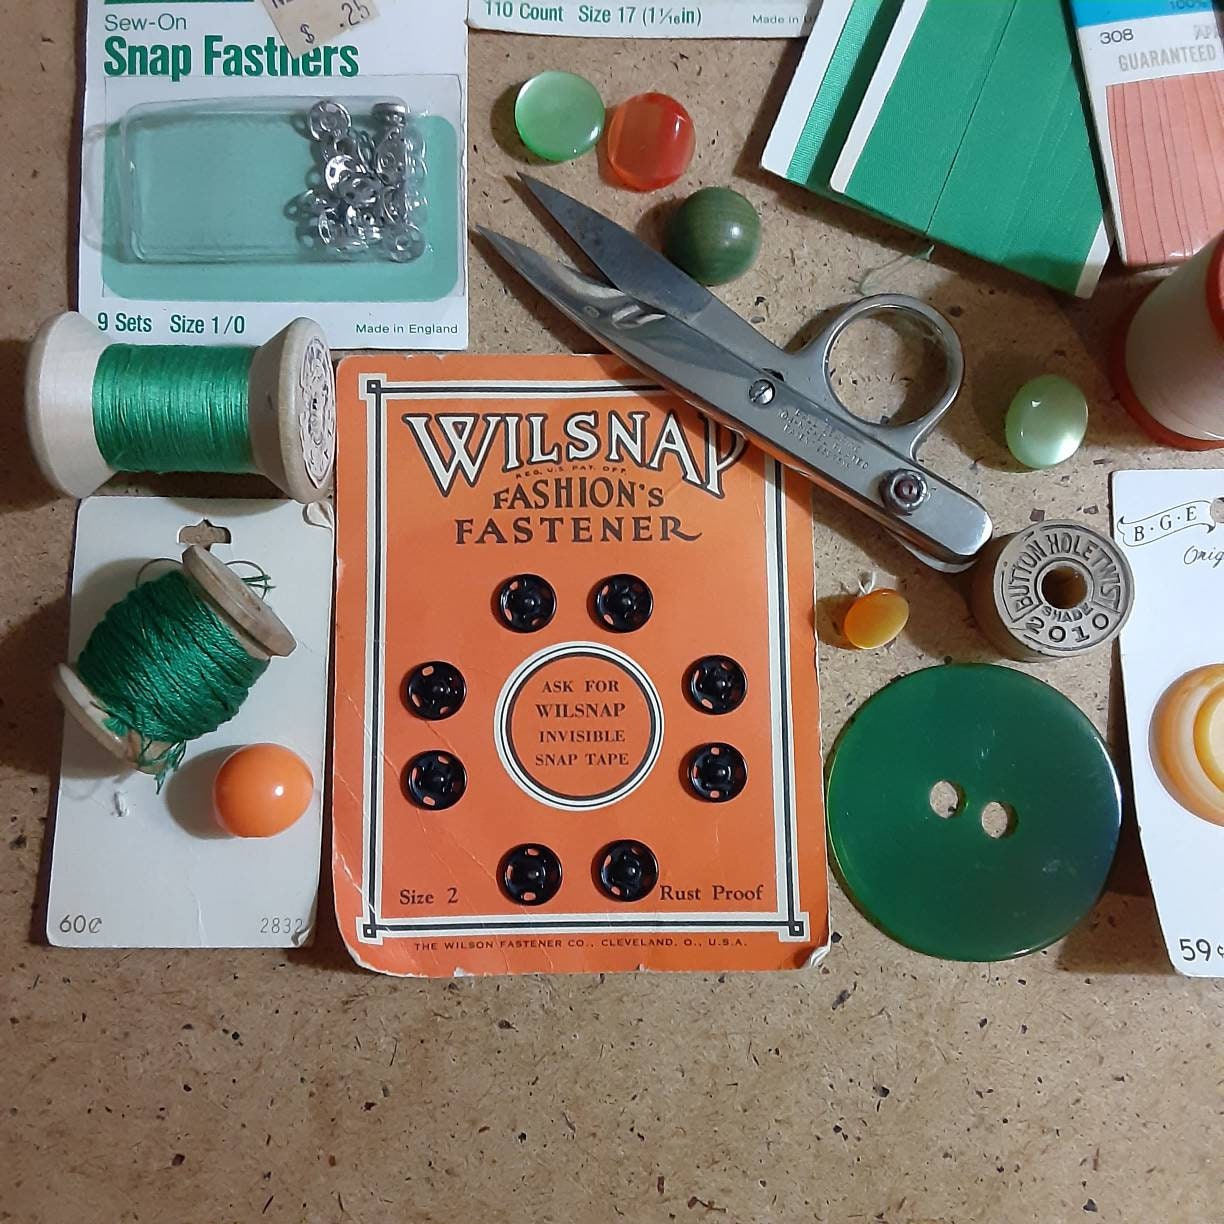 How to Make a Vintage Button Needle Minder and Needle Threader — Sum of  their Stories Craft Blog